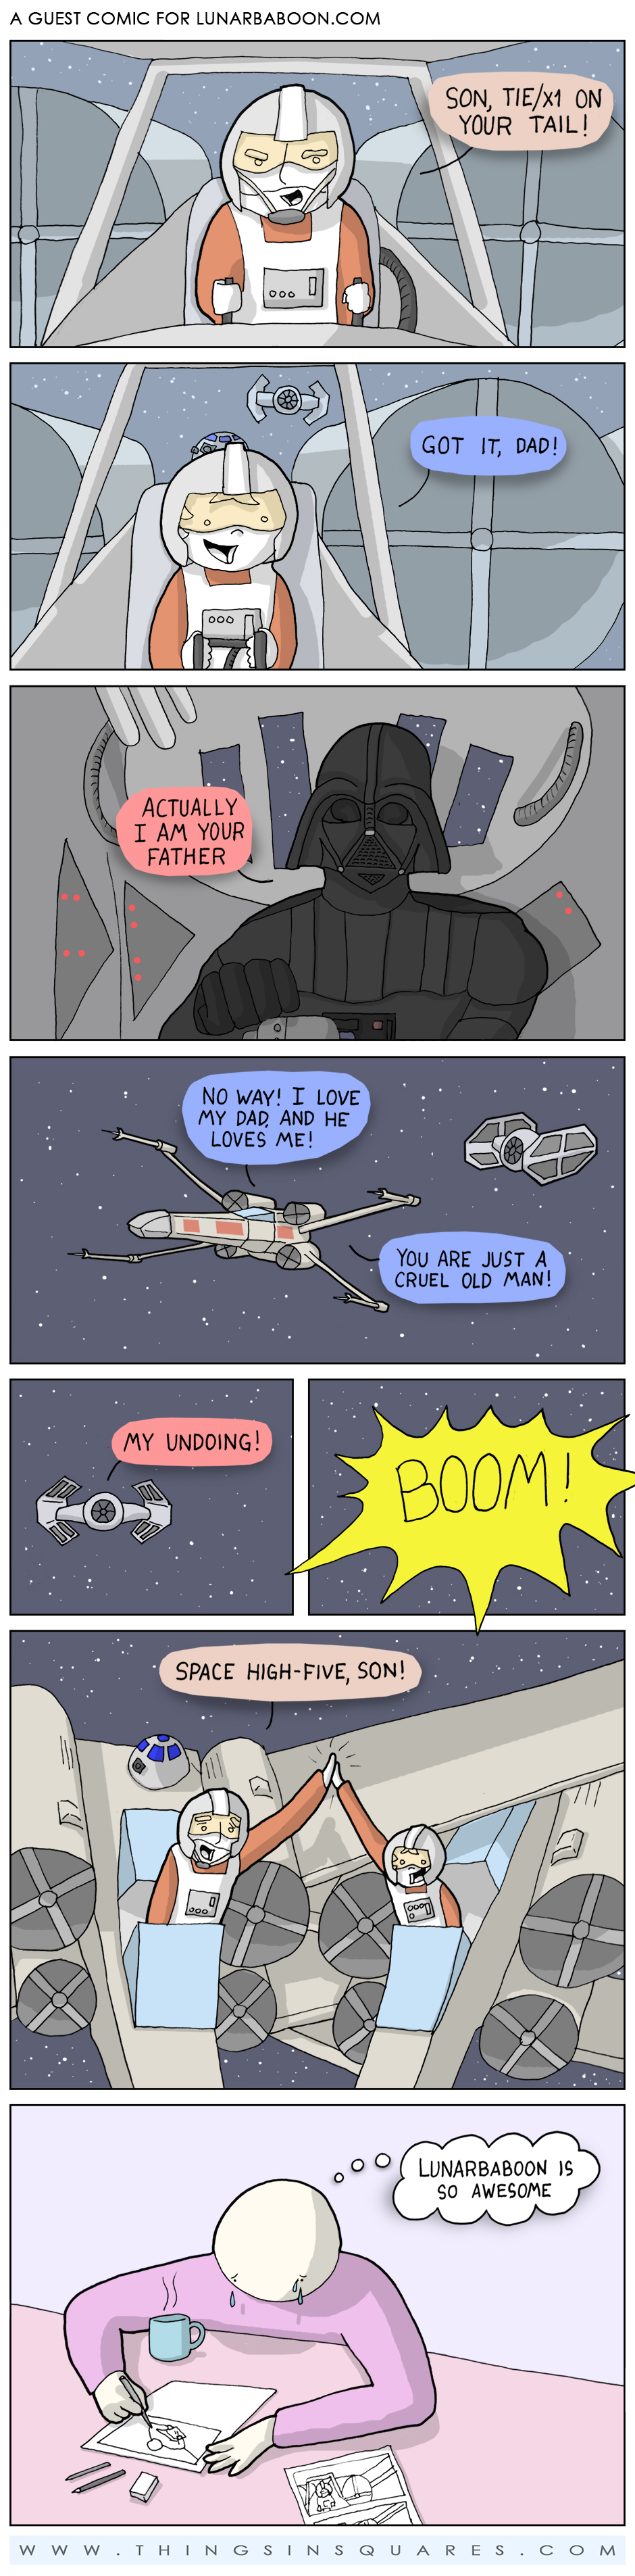 A guest comic about Star Wars for Lunarbaboon comic